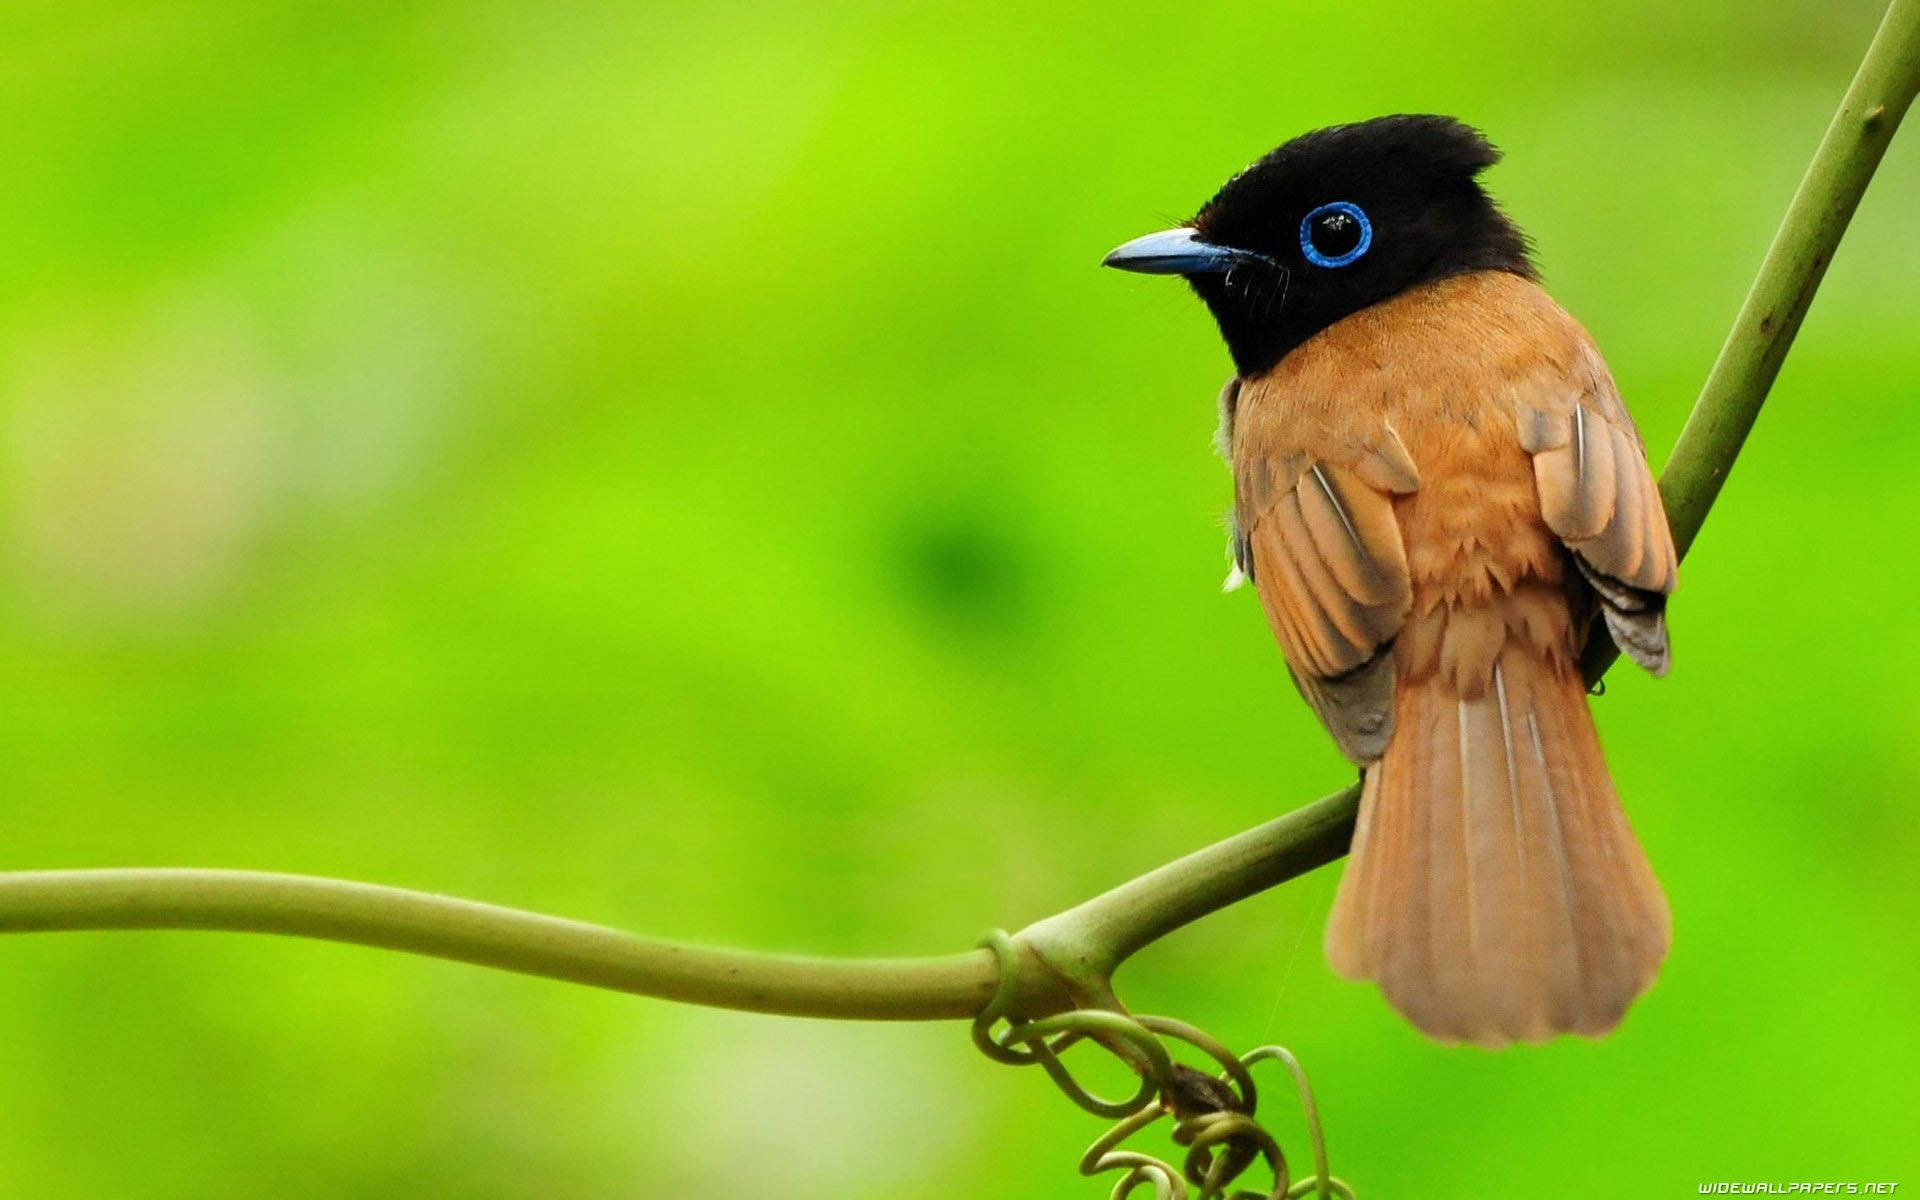 A stunningly beautiful brown and black bird perched on a branch. Wallpaper